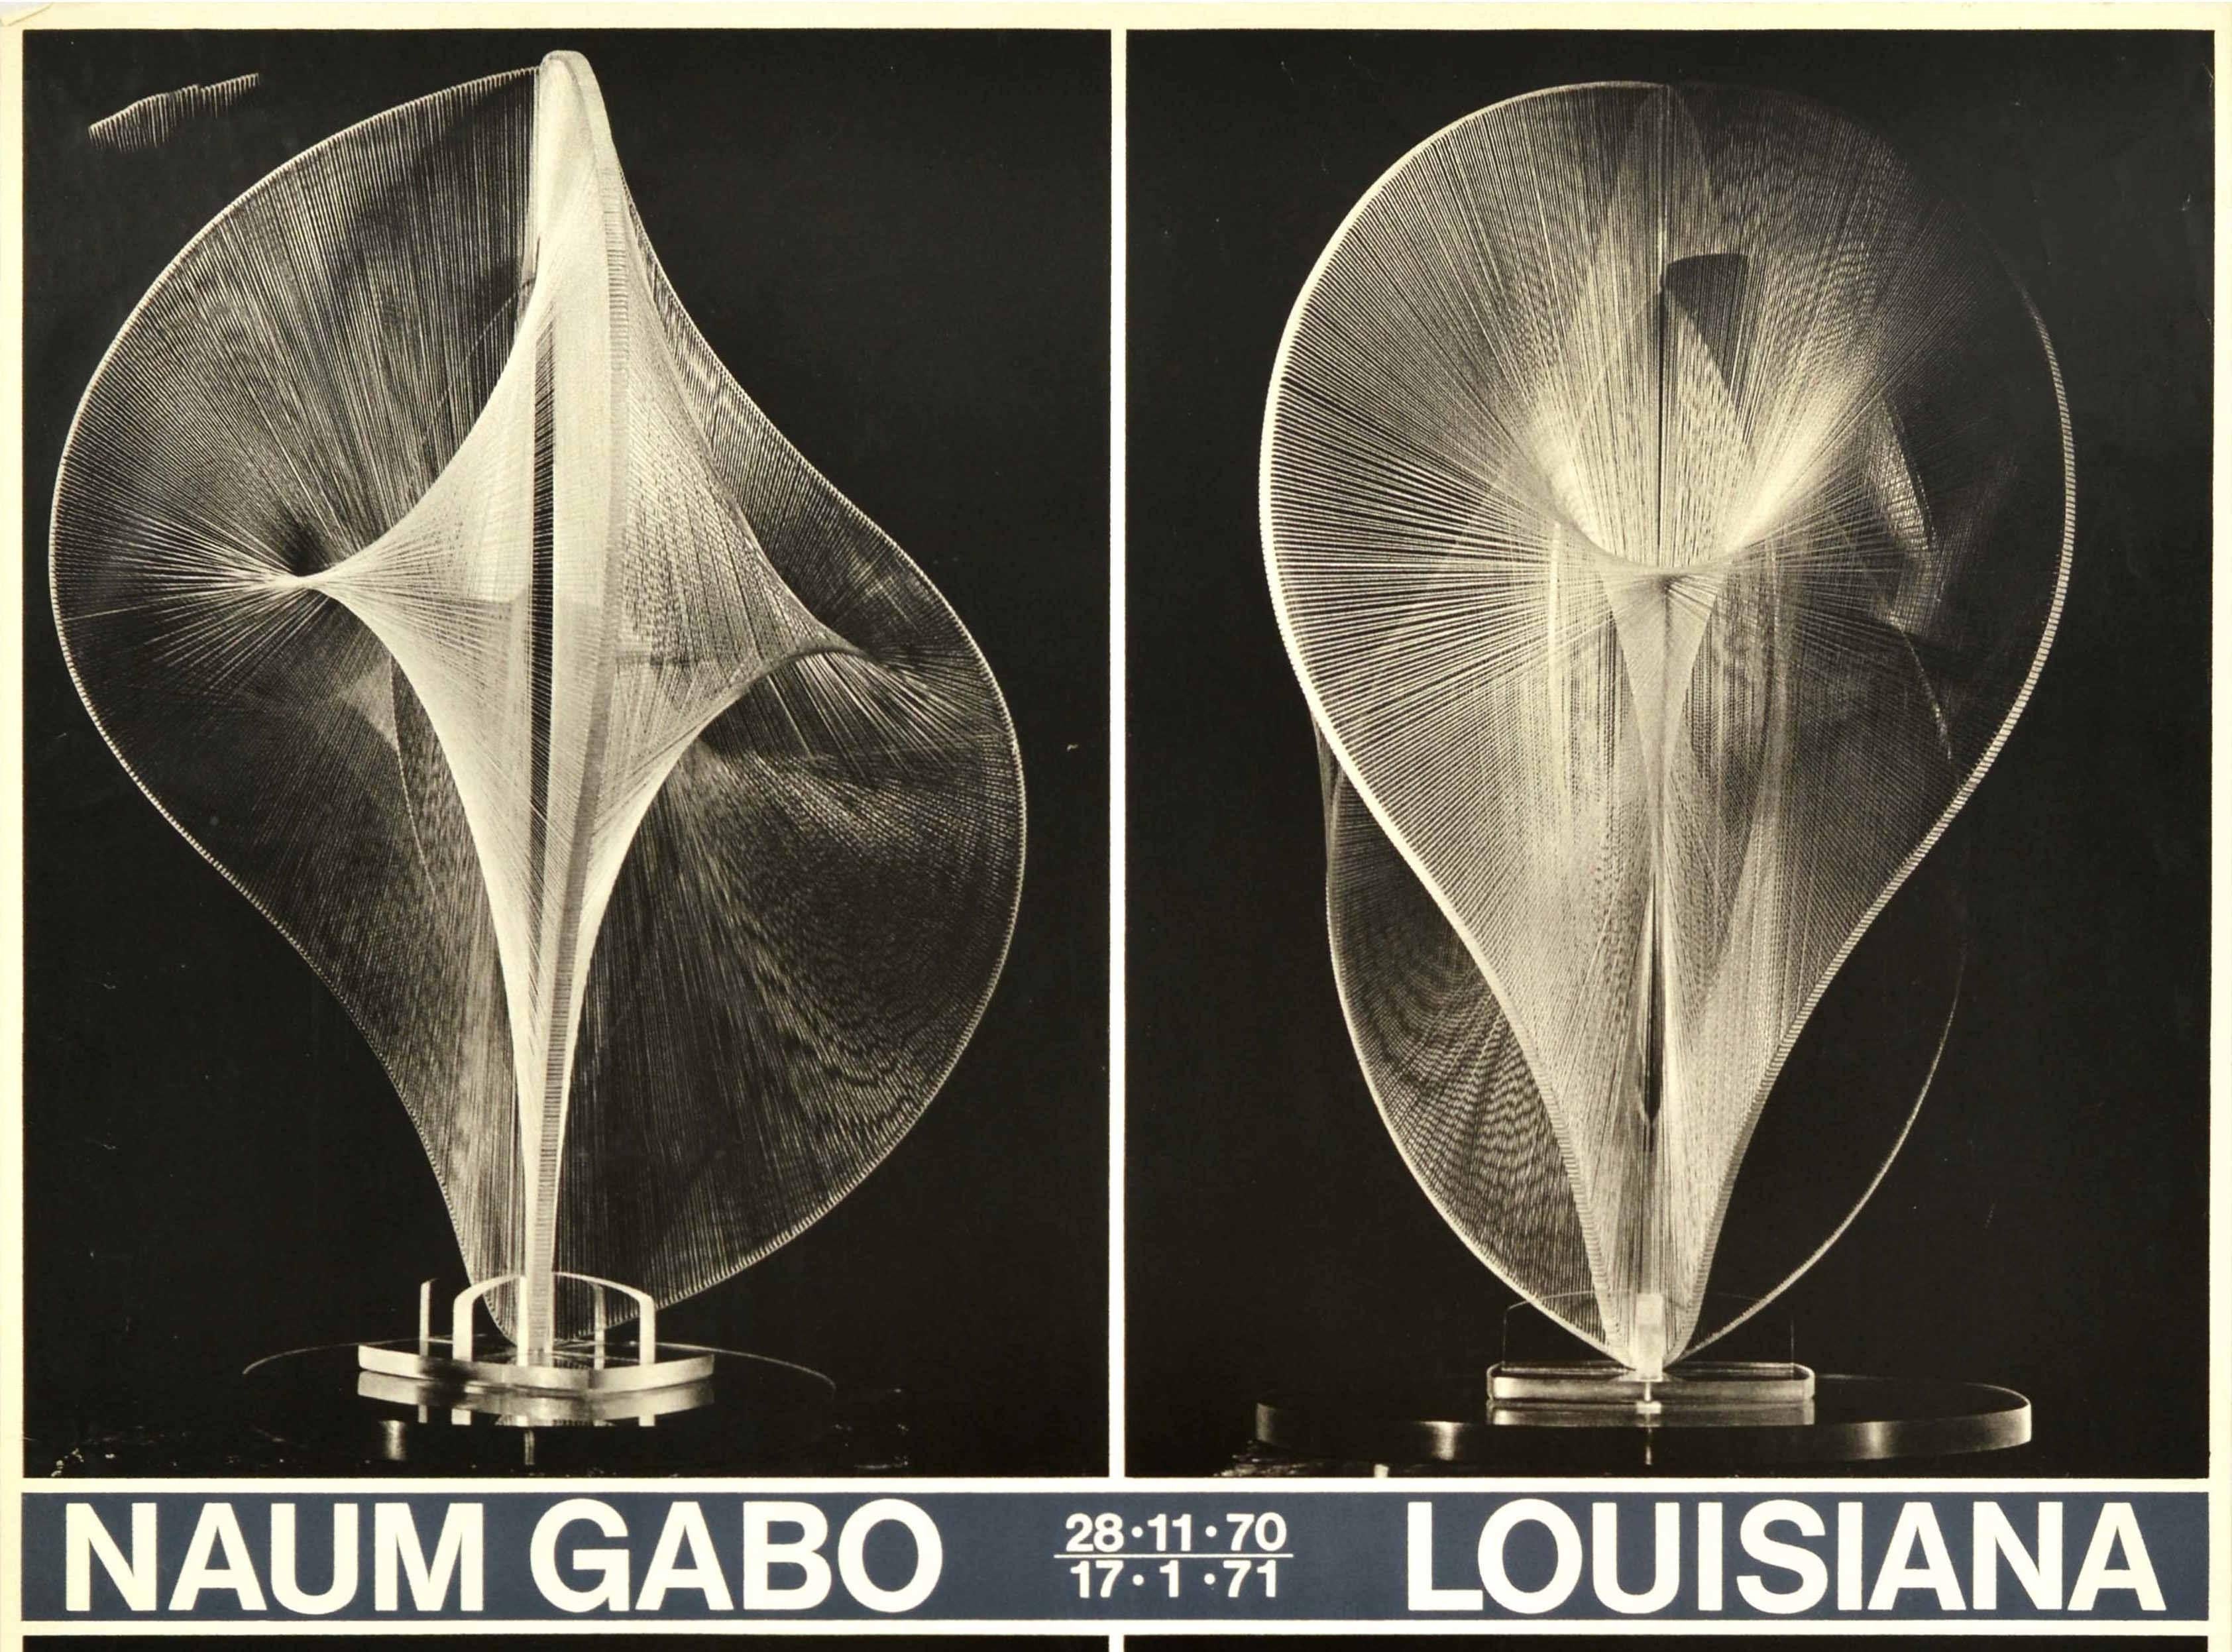 Original vintage advertising poster for an exhibition of work by the notable avant-garde sculptor, Kinetic artist and printmaker Naum Gabo (Naum Neemia Pevsner; 1890-1977) in Louisiana from 28 November 1970 to 17 January 1971 featuring four abstract